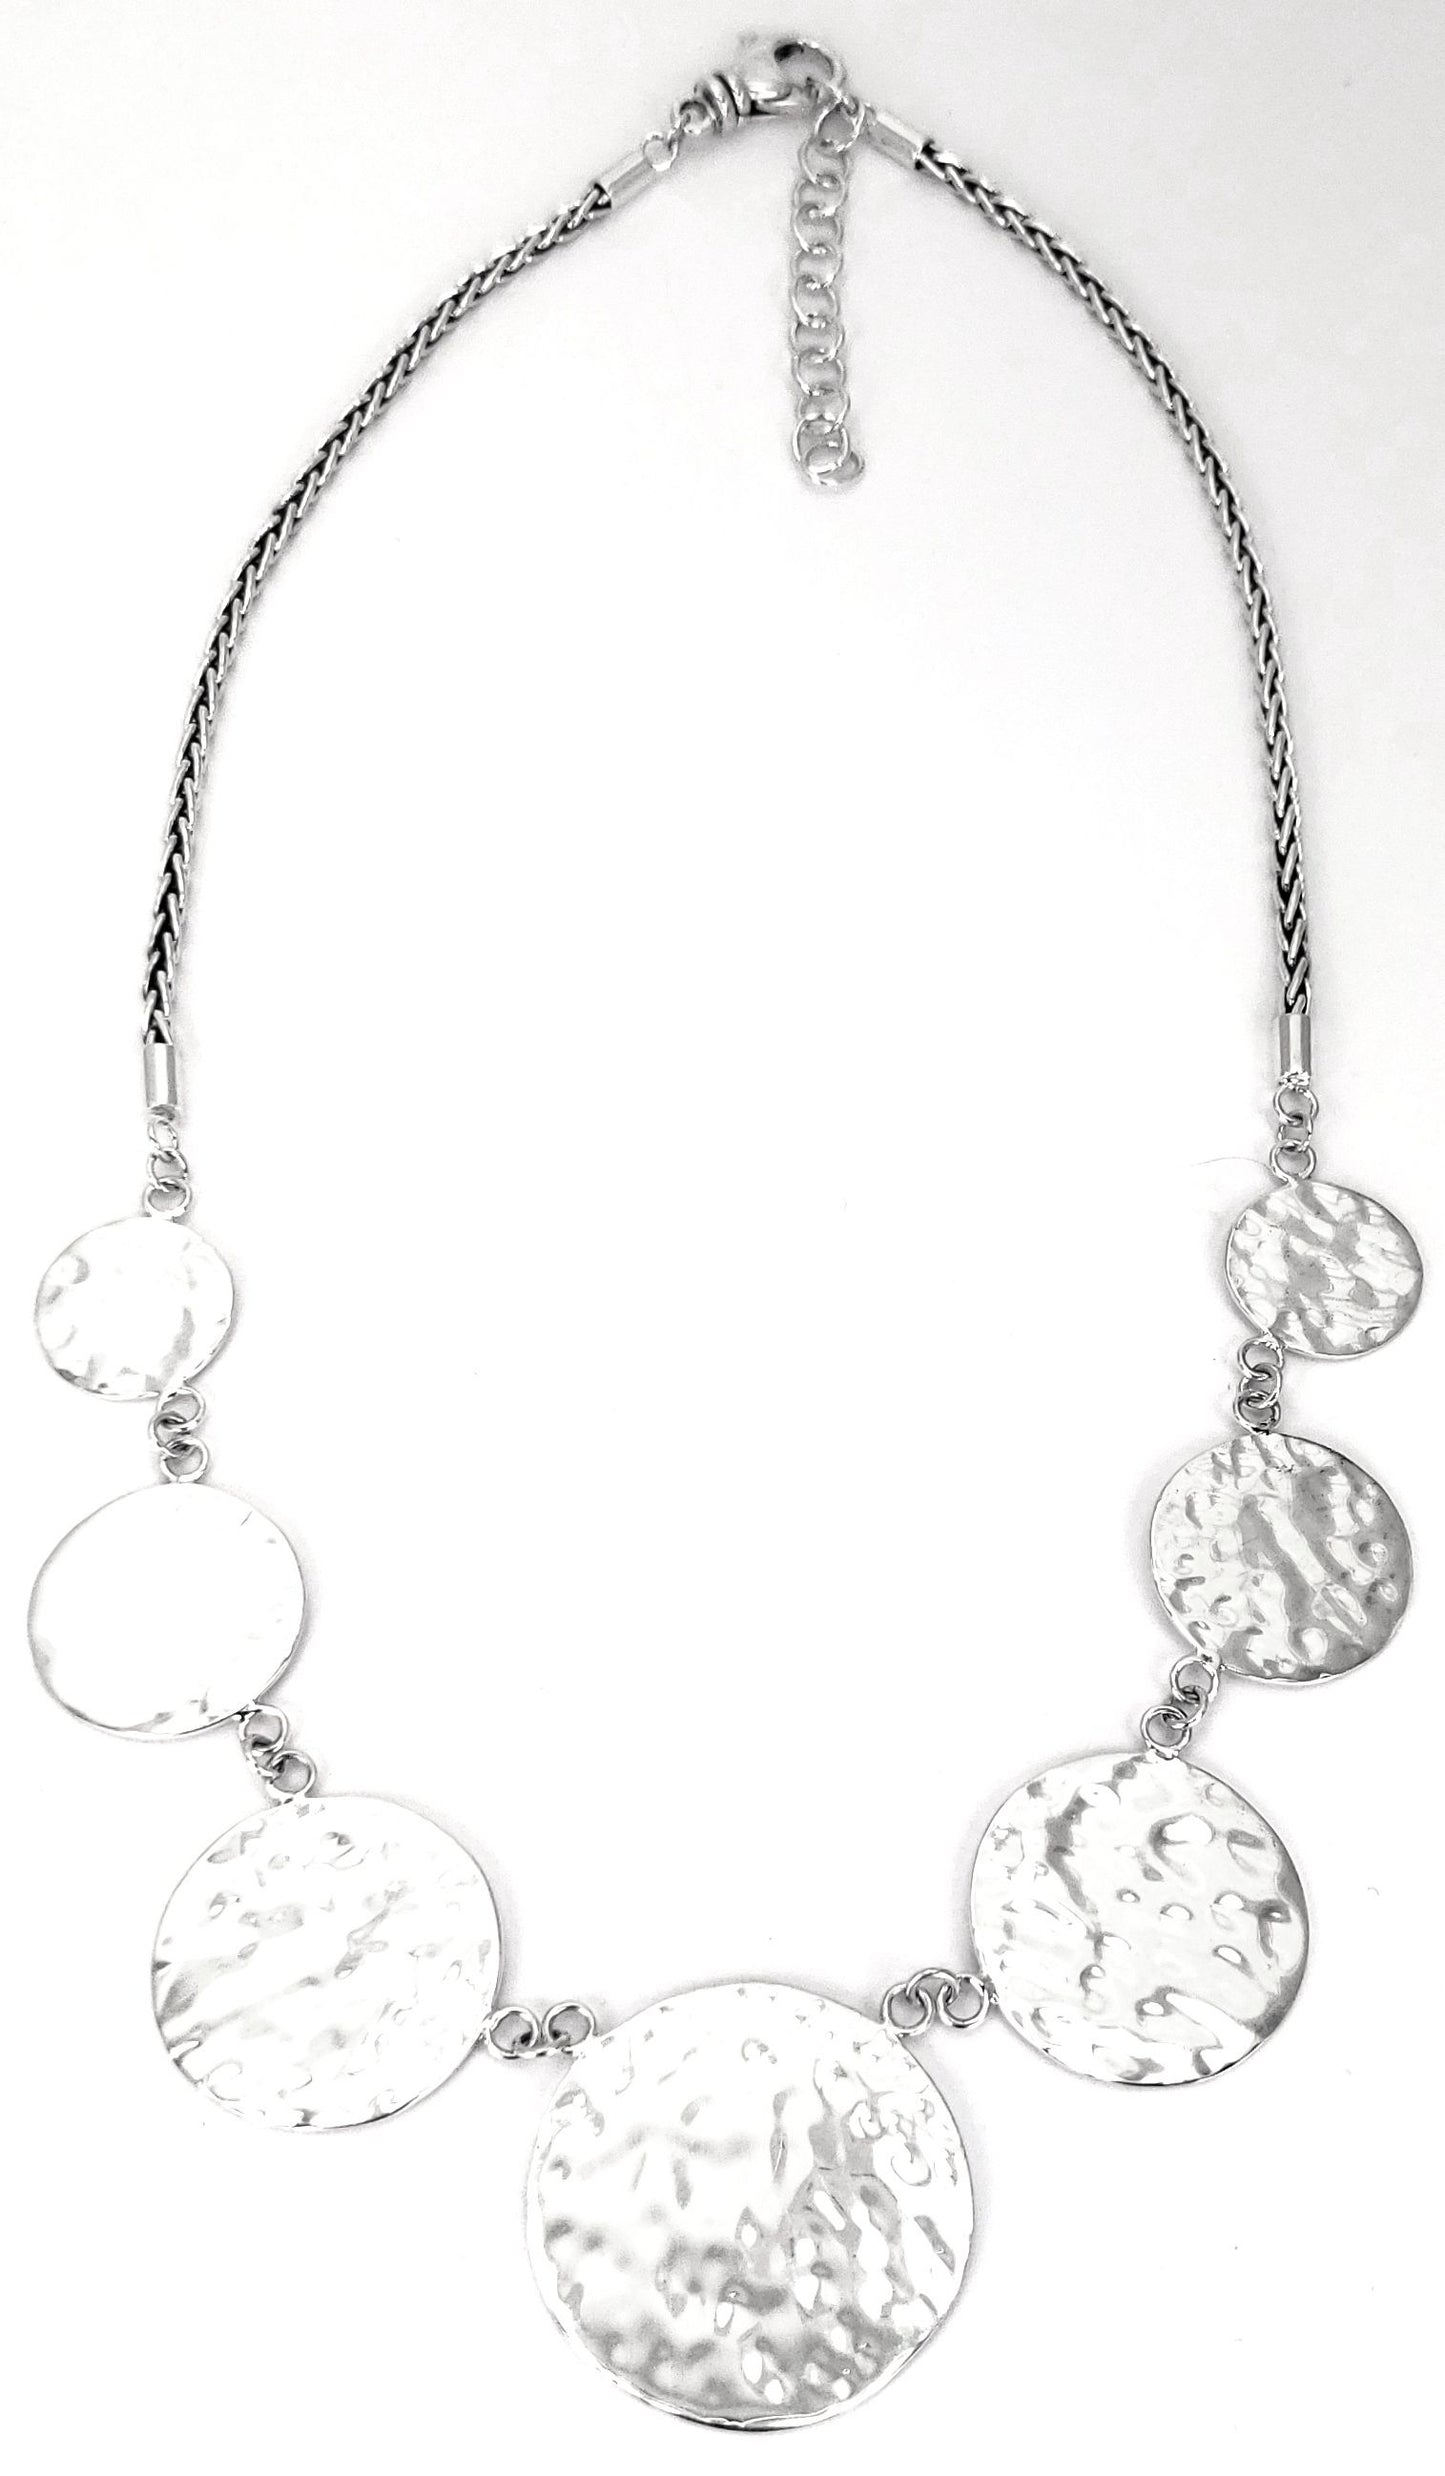 N719 LIMITED .925 Sterling Silver Hand Hammered Disc Station Necklace from Bali